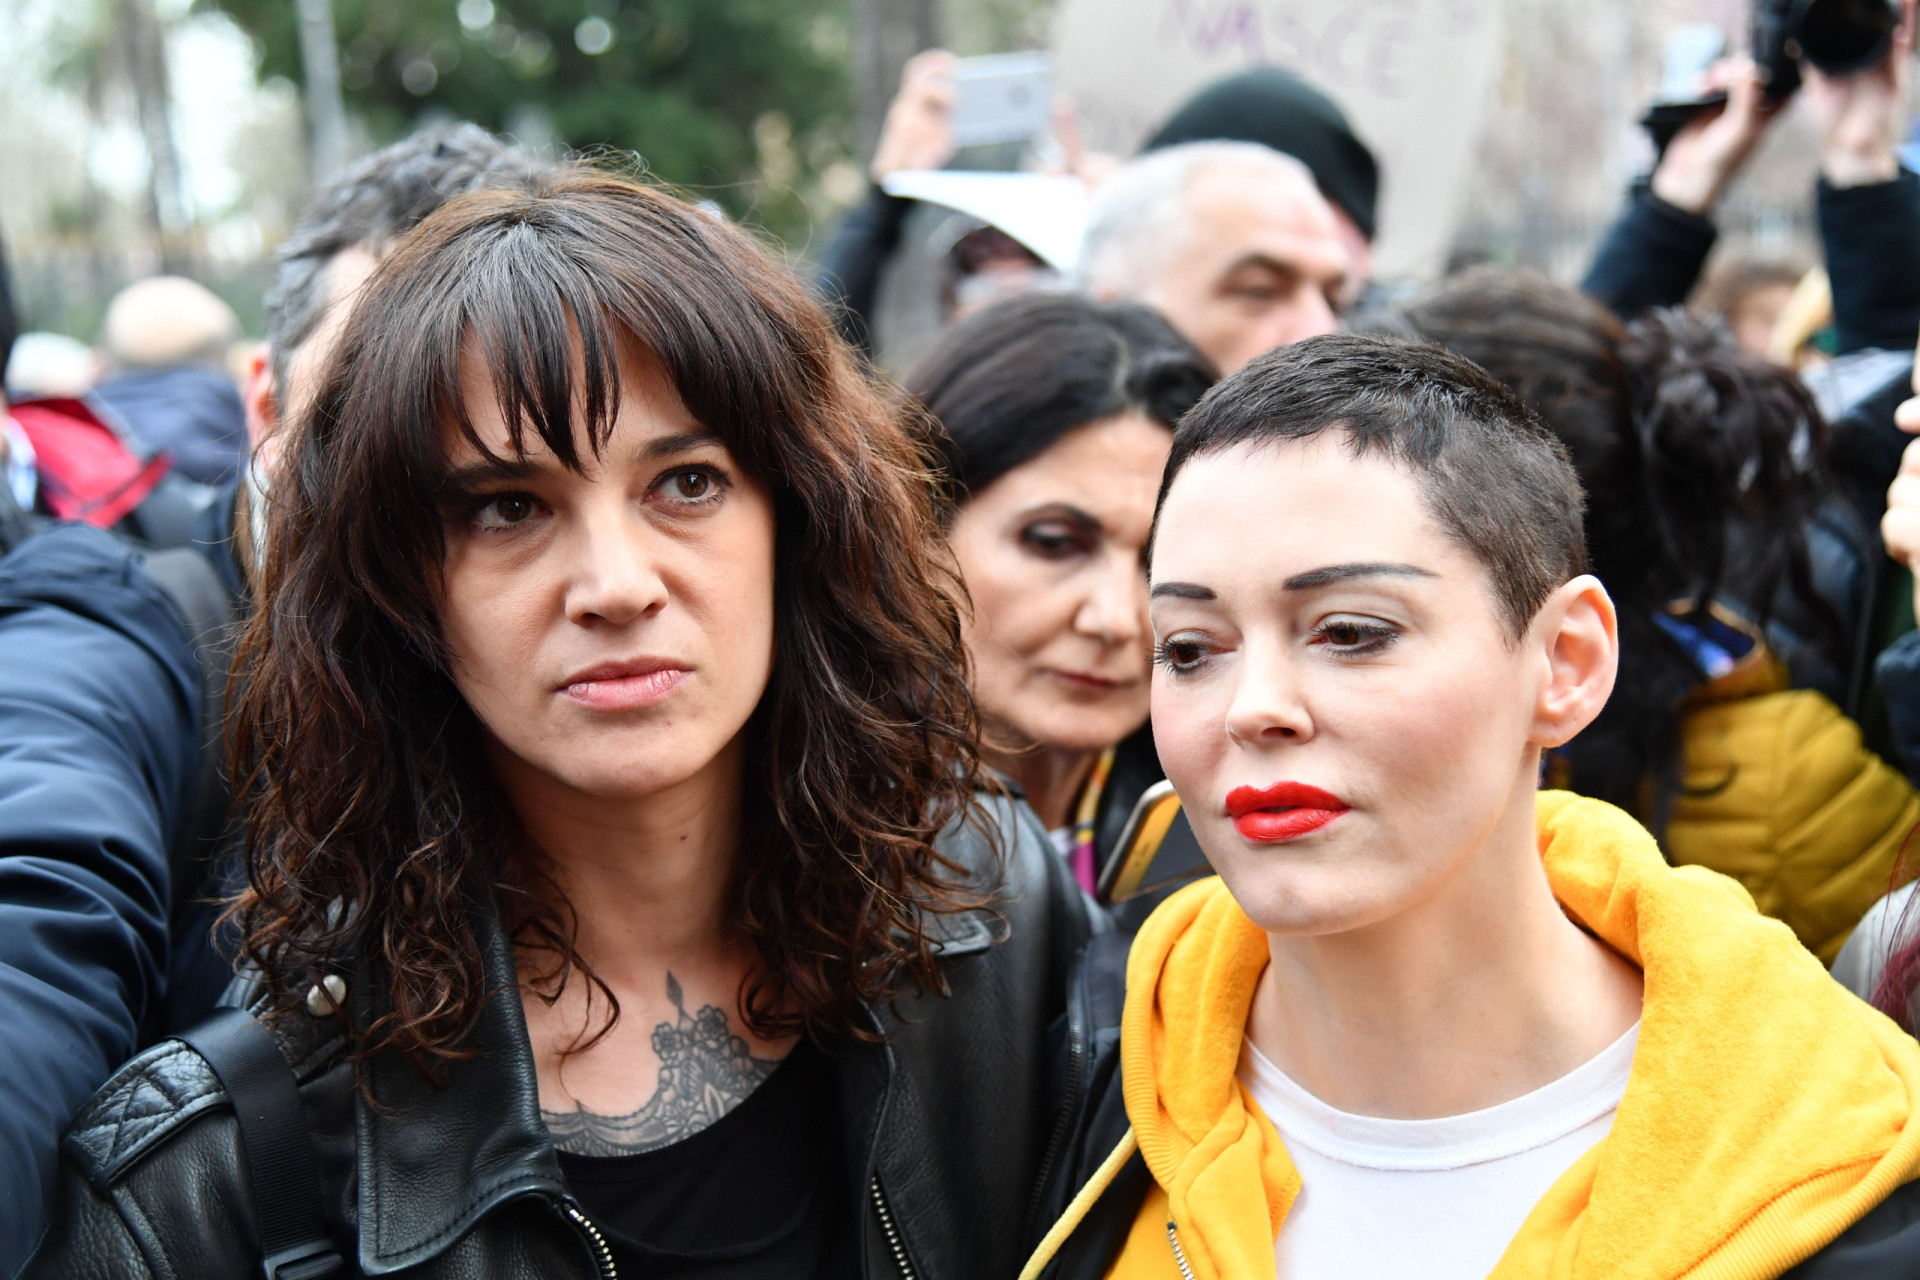 <p>Both stars spoke out during the Harvey Weinstein scandal to accuse him of sexual assault. However, McGowan later claimed that she believed Argento had a sexual relationship with actor Jimmy Bennett when he was 17. Argento supposedly demanded that McGowan retract her statement within 24 hours, threatening legal consequences if she didn't comply.</p><p><a href="https://www.msn.com/en-us/community/channel/vid-7xx8mnucu55yw63we9va2gwr7uihbxwc68fxqp25x6tg4ftibpra?cvid=94631541bc0f4f89bfd59158d696ad7e">Follow us and access great exclusive content every day</a></p>